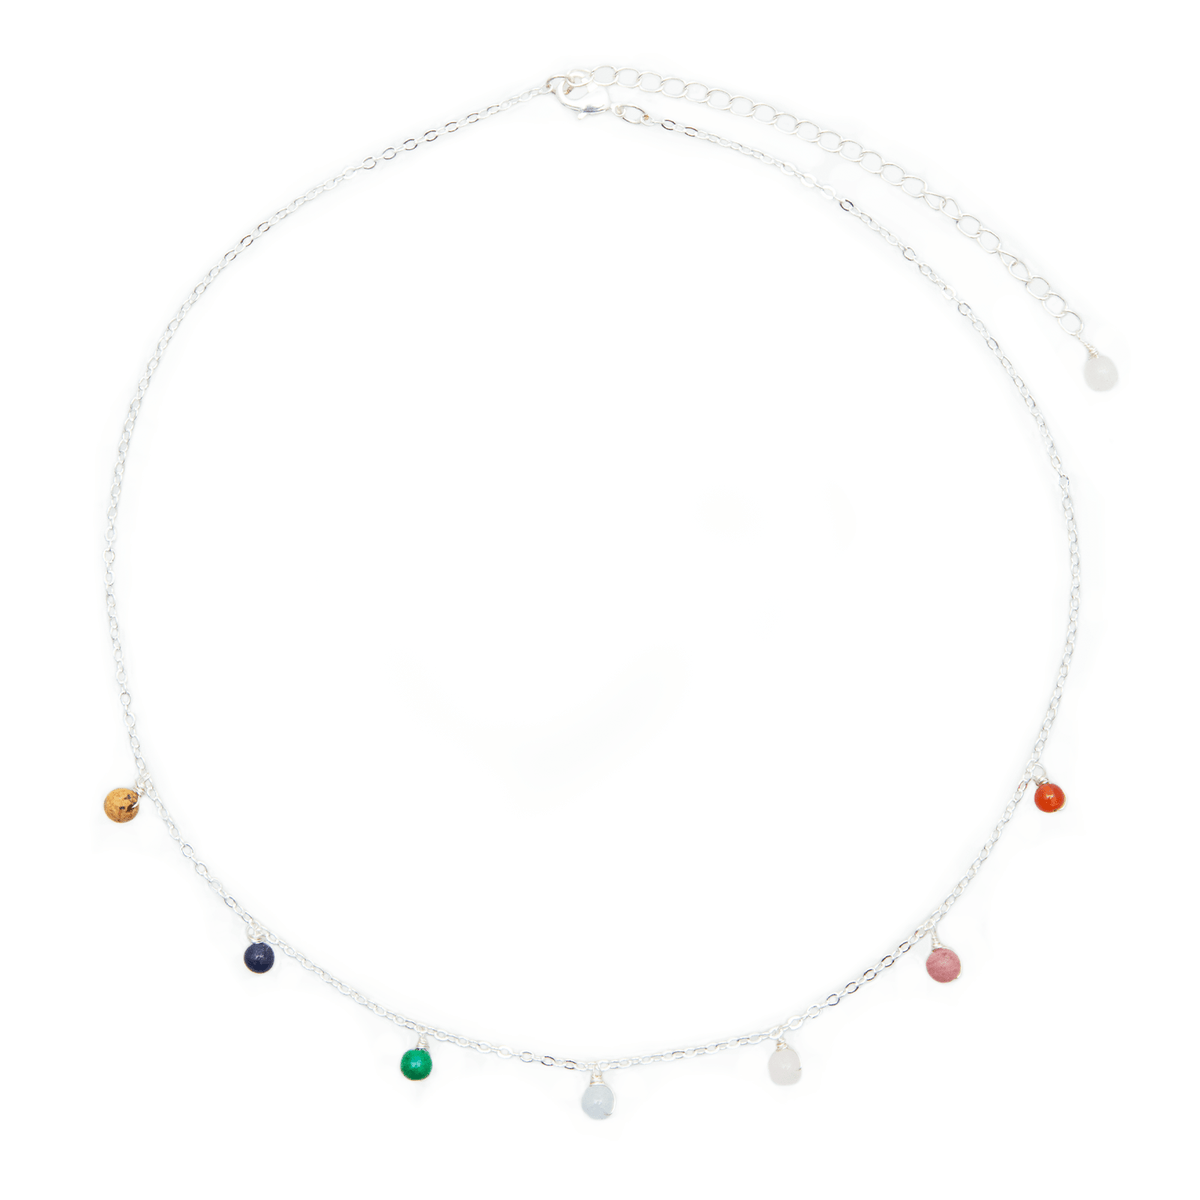 Dewdrop charm necklace with multicolor stones and a silver chain